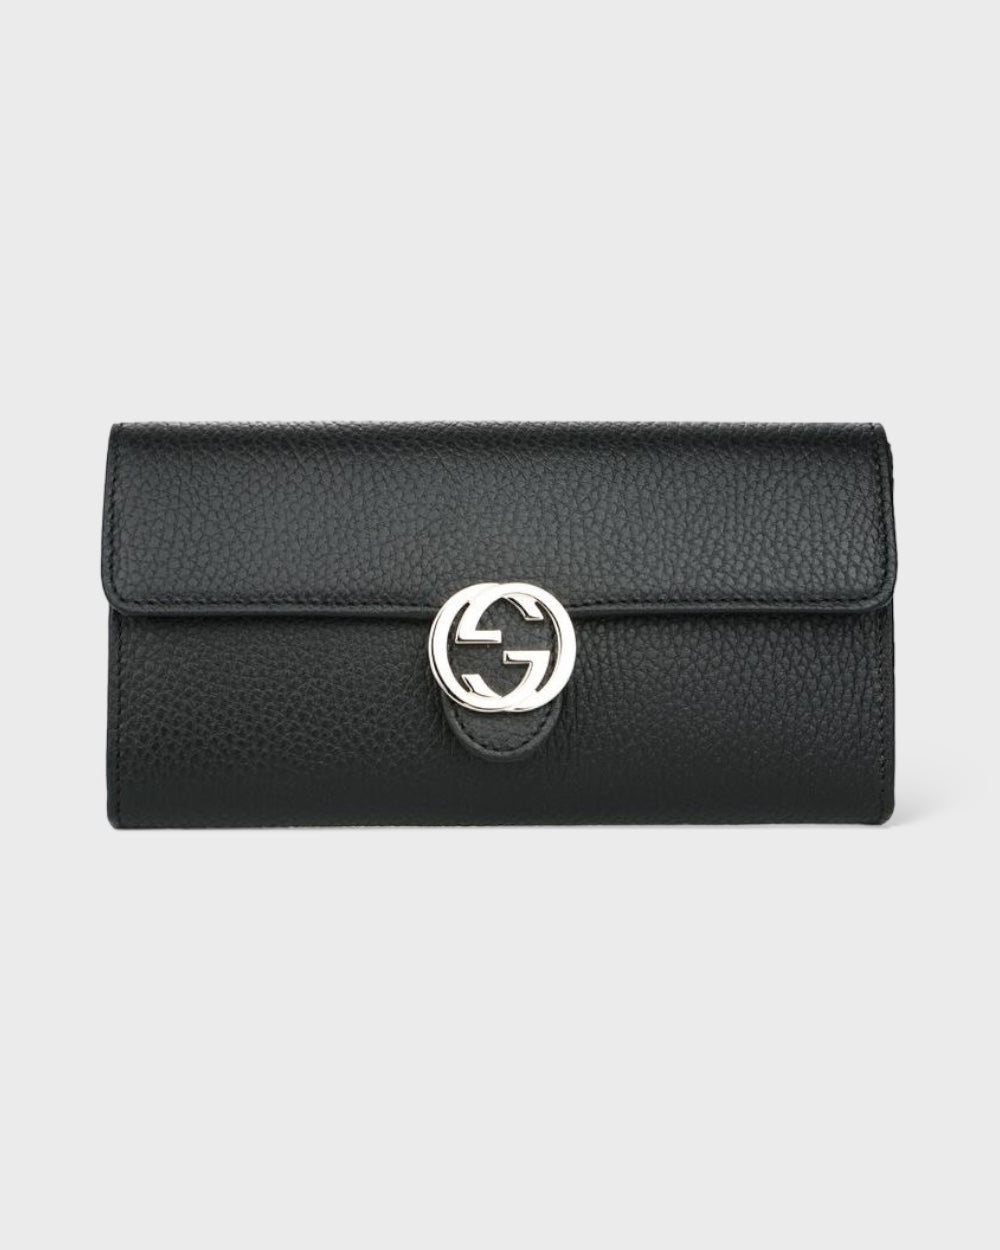 Gucci Black Leather Wallet